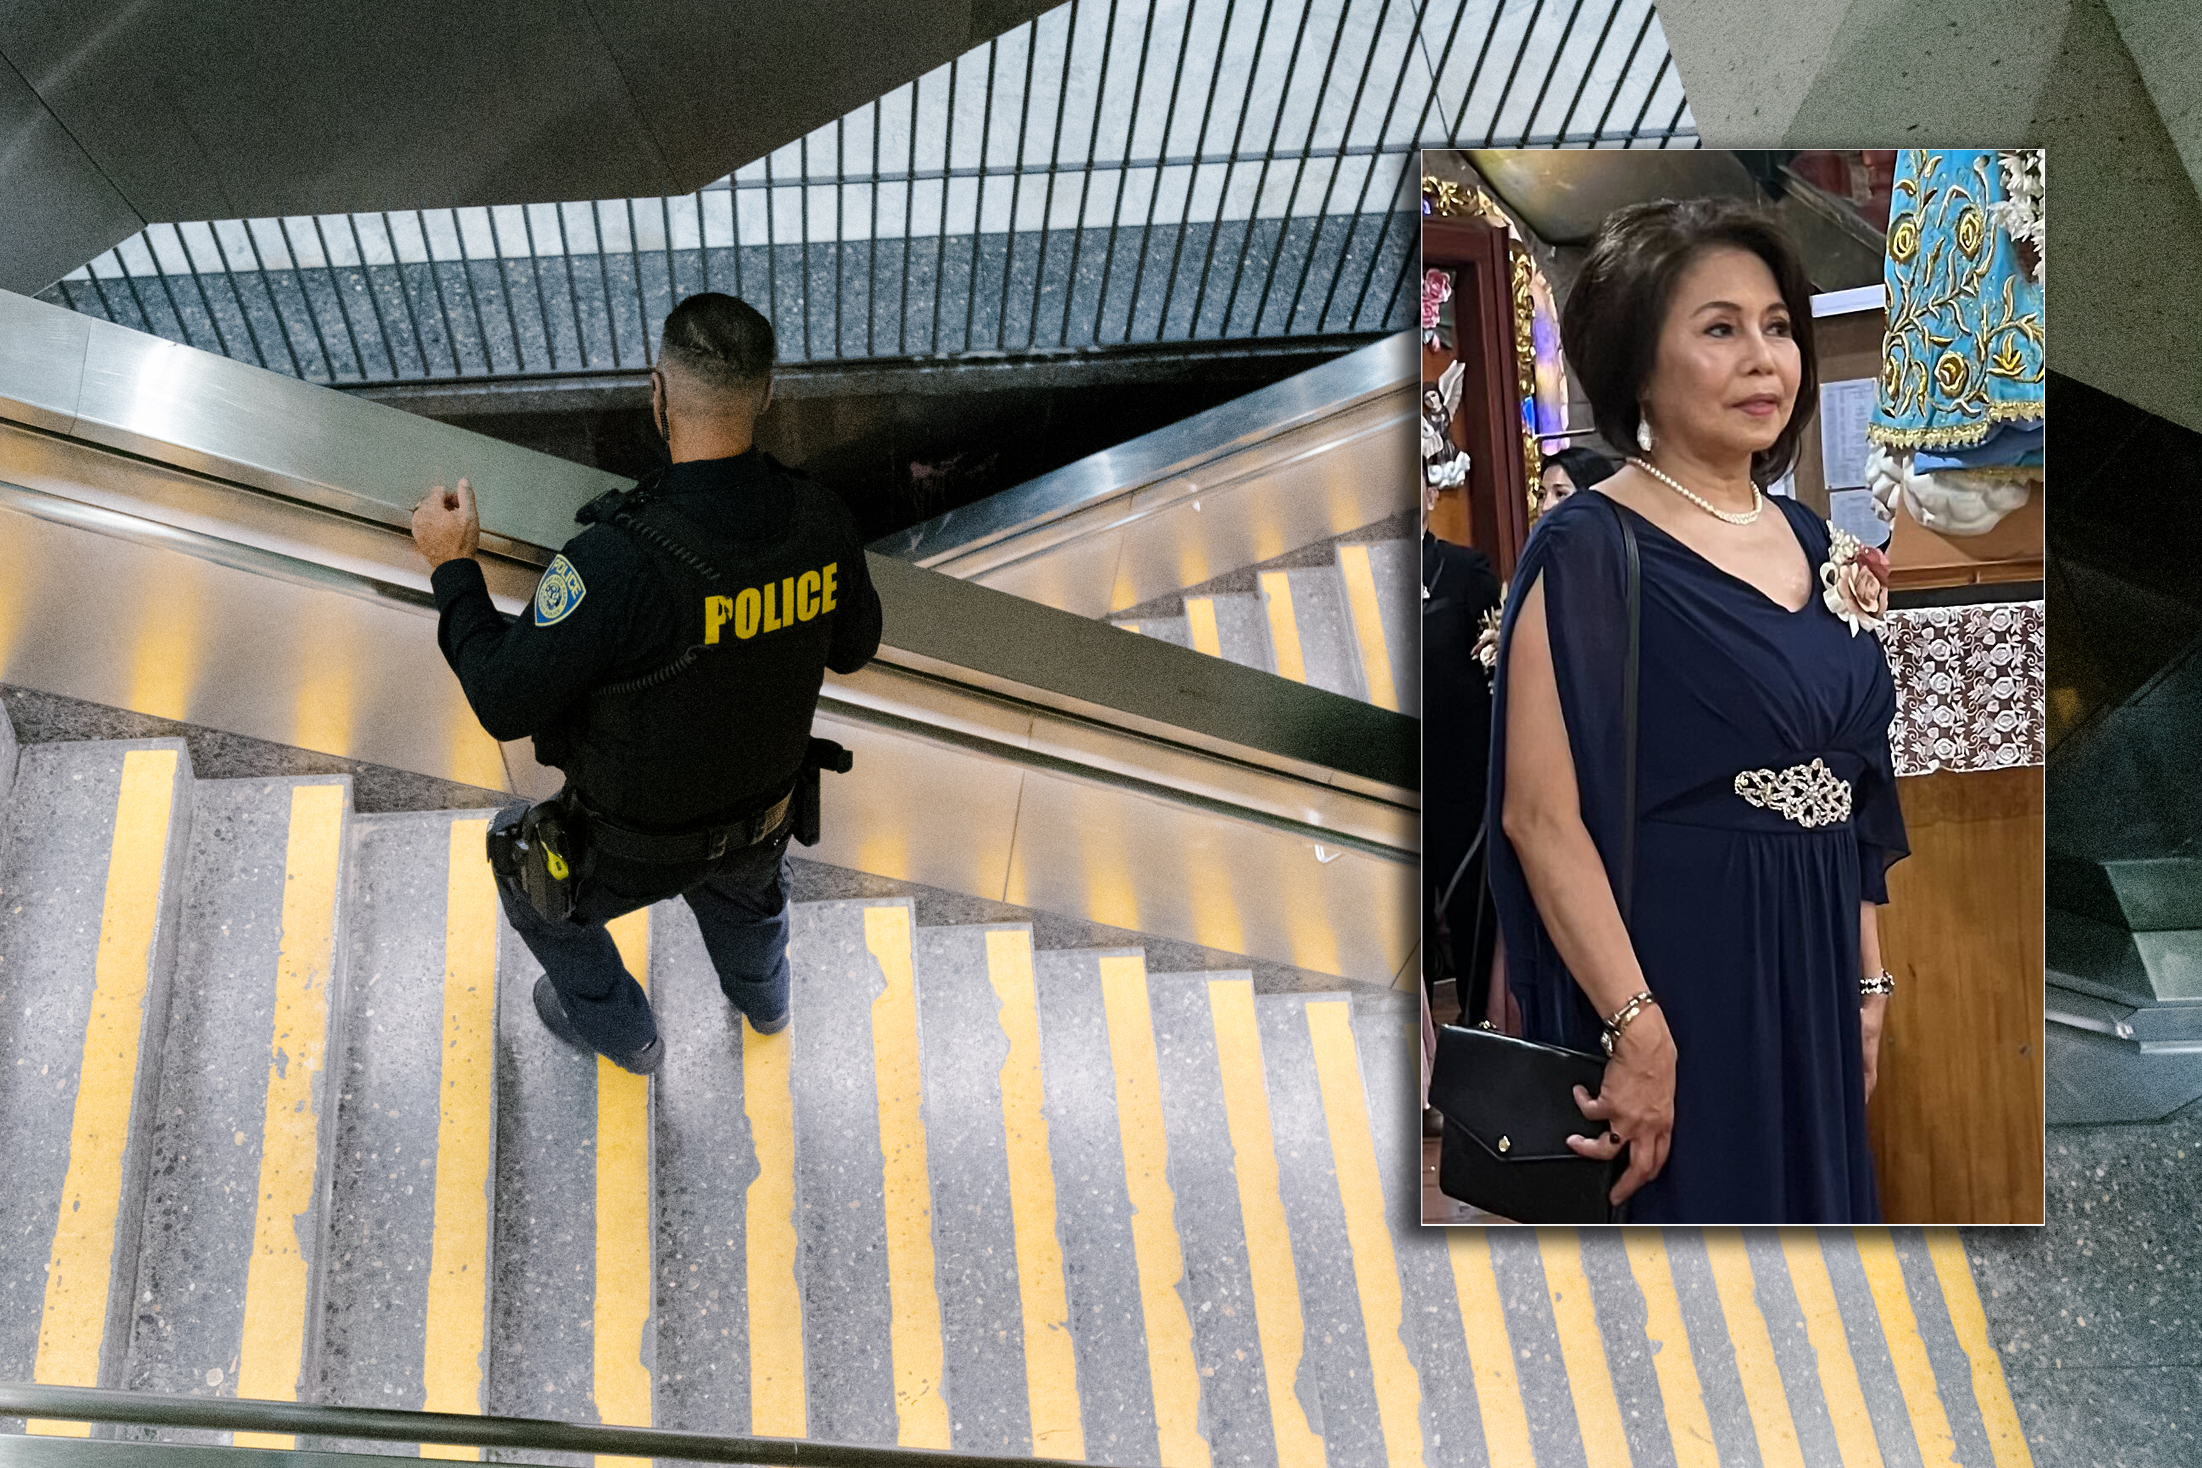 A police officer in uniform is descending stairs with yellow lines. An inset image shows a woman in a dark blue formal dress with pearl necklace standing indoors.